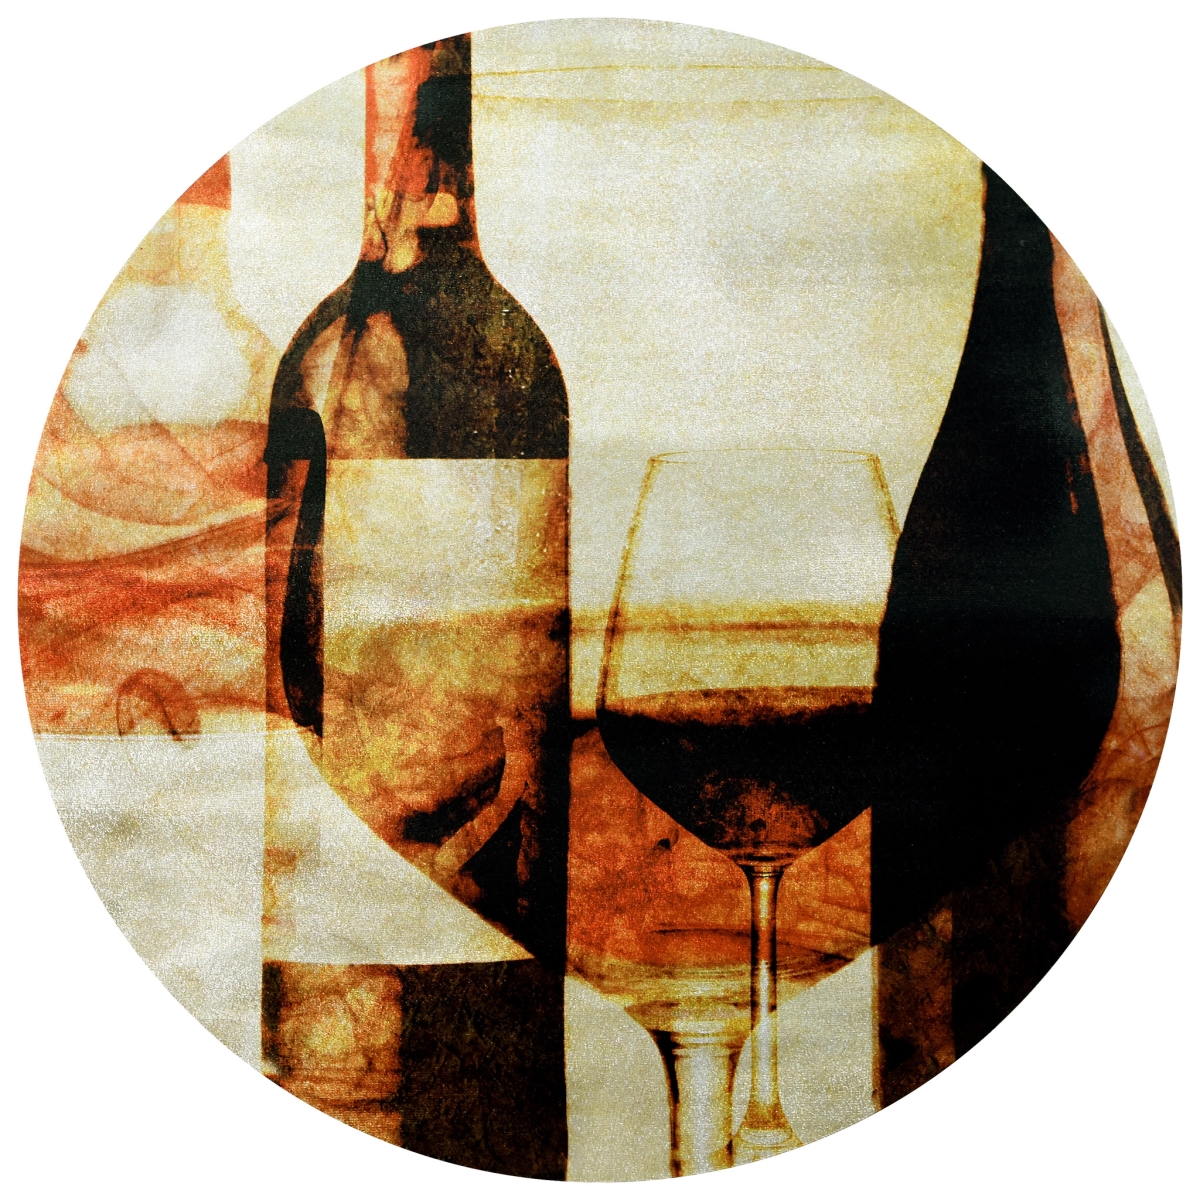 Scgr-132398-32 32 In. Circular Silver Giclee Printed Wine Canvas Wall Art